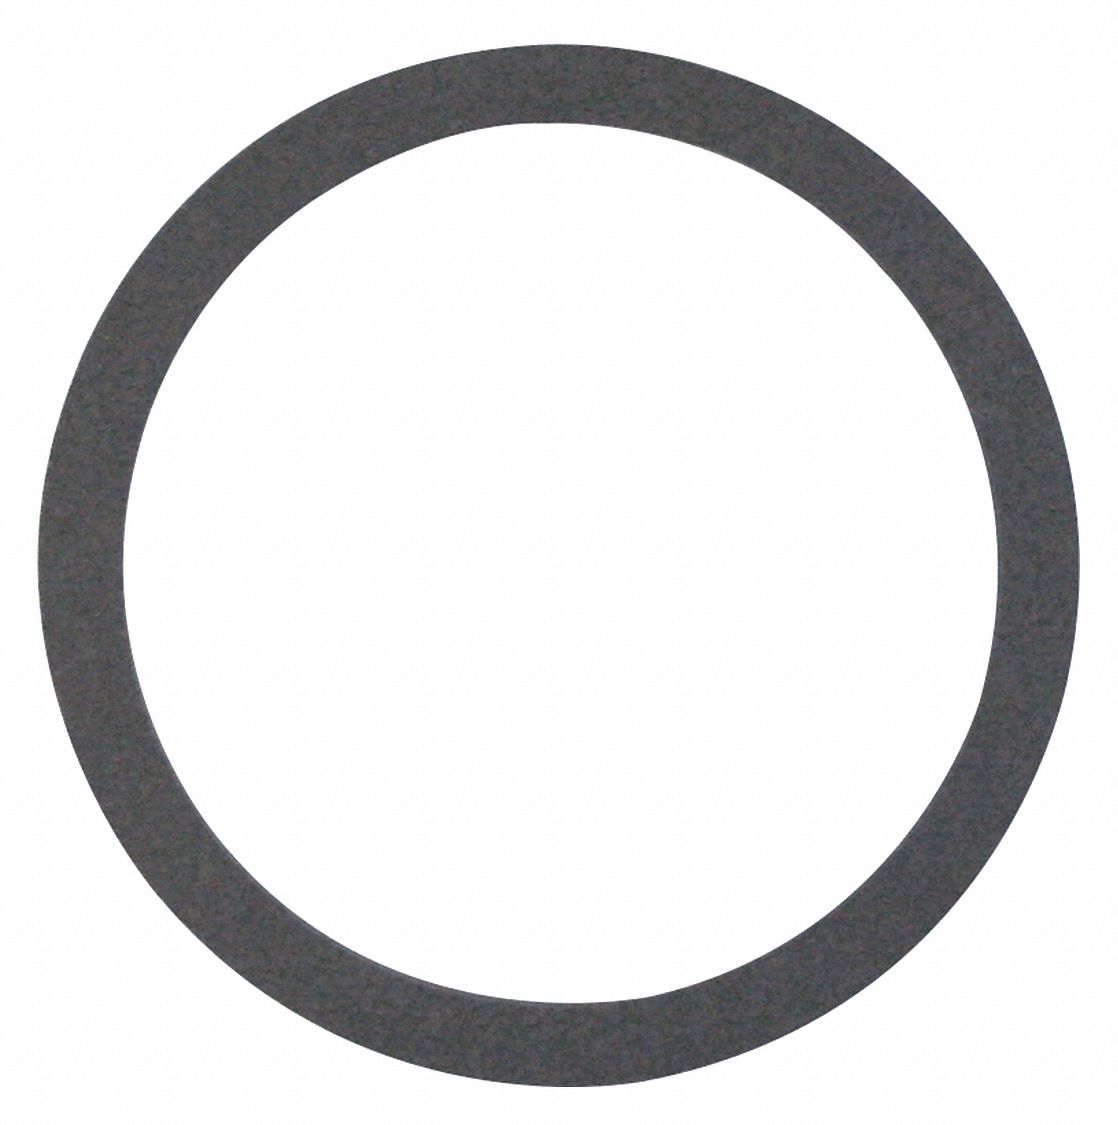 Gasket: 2 in Tube Size, 1.875 in Inside Dia., 2.2656 in Outside Dia., 5/64 in Thick